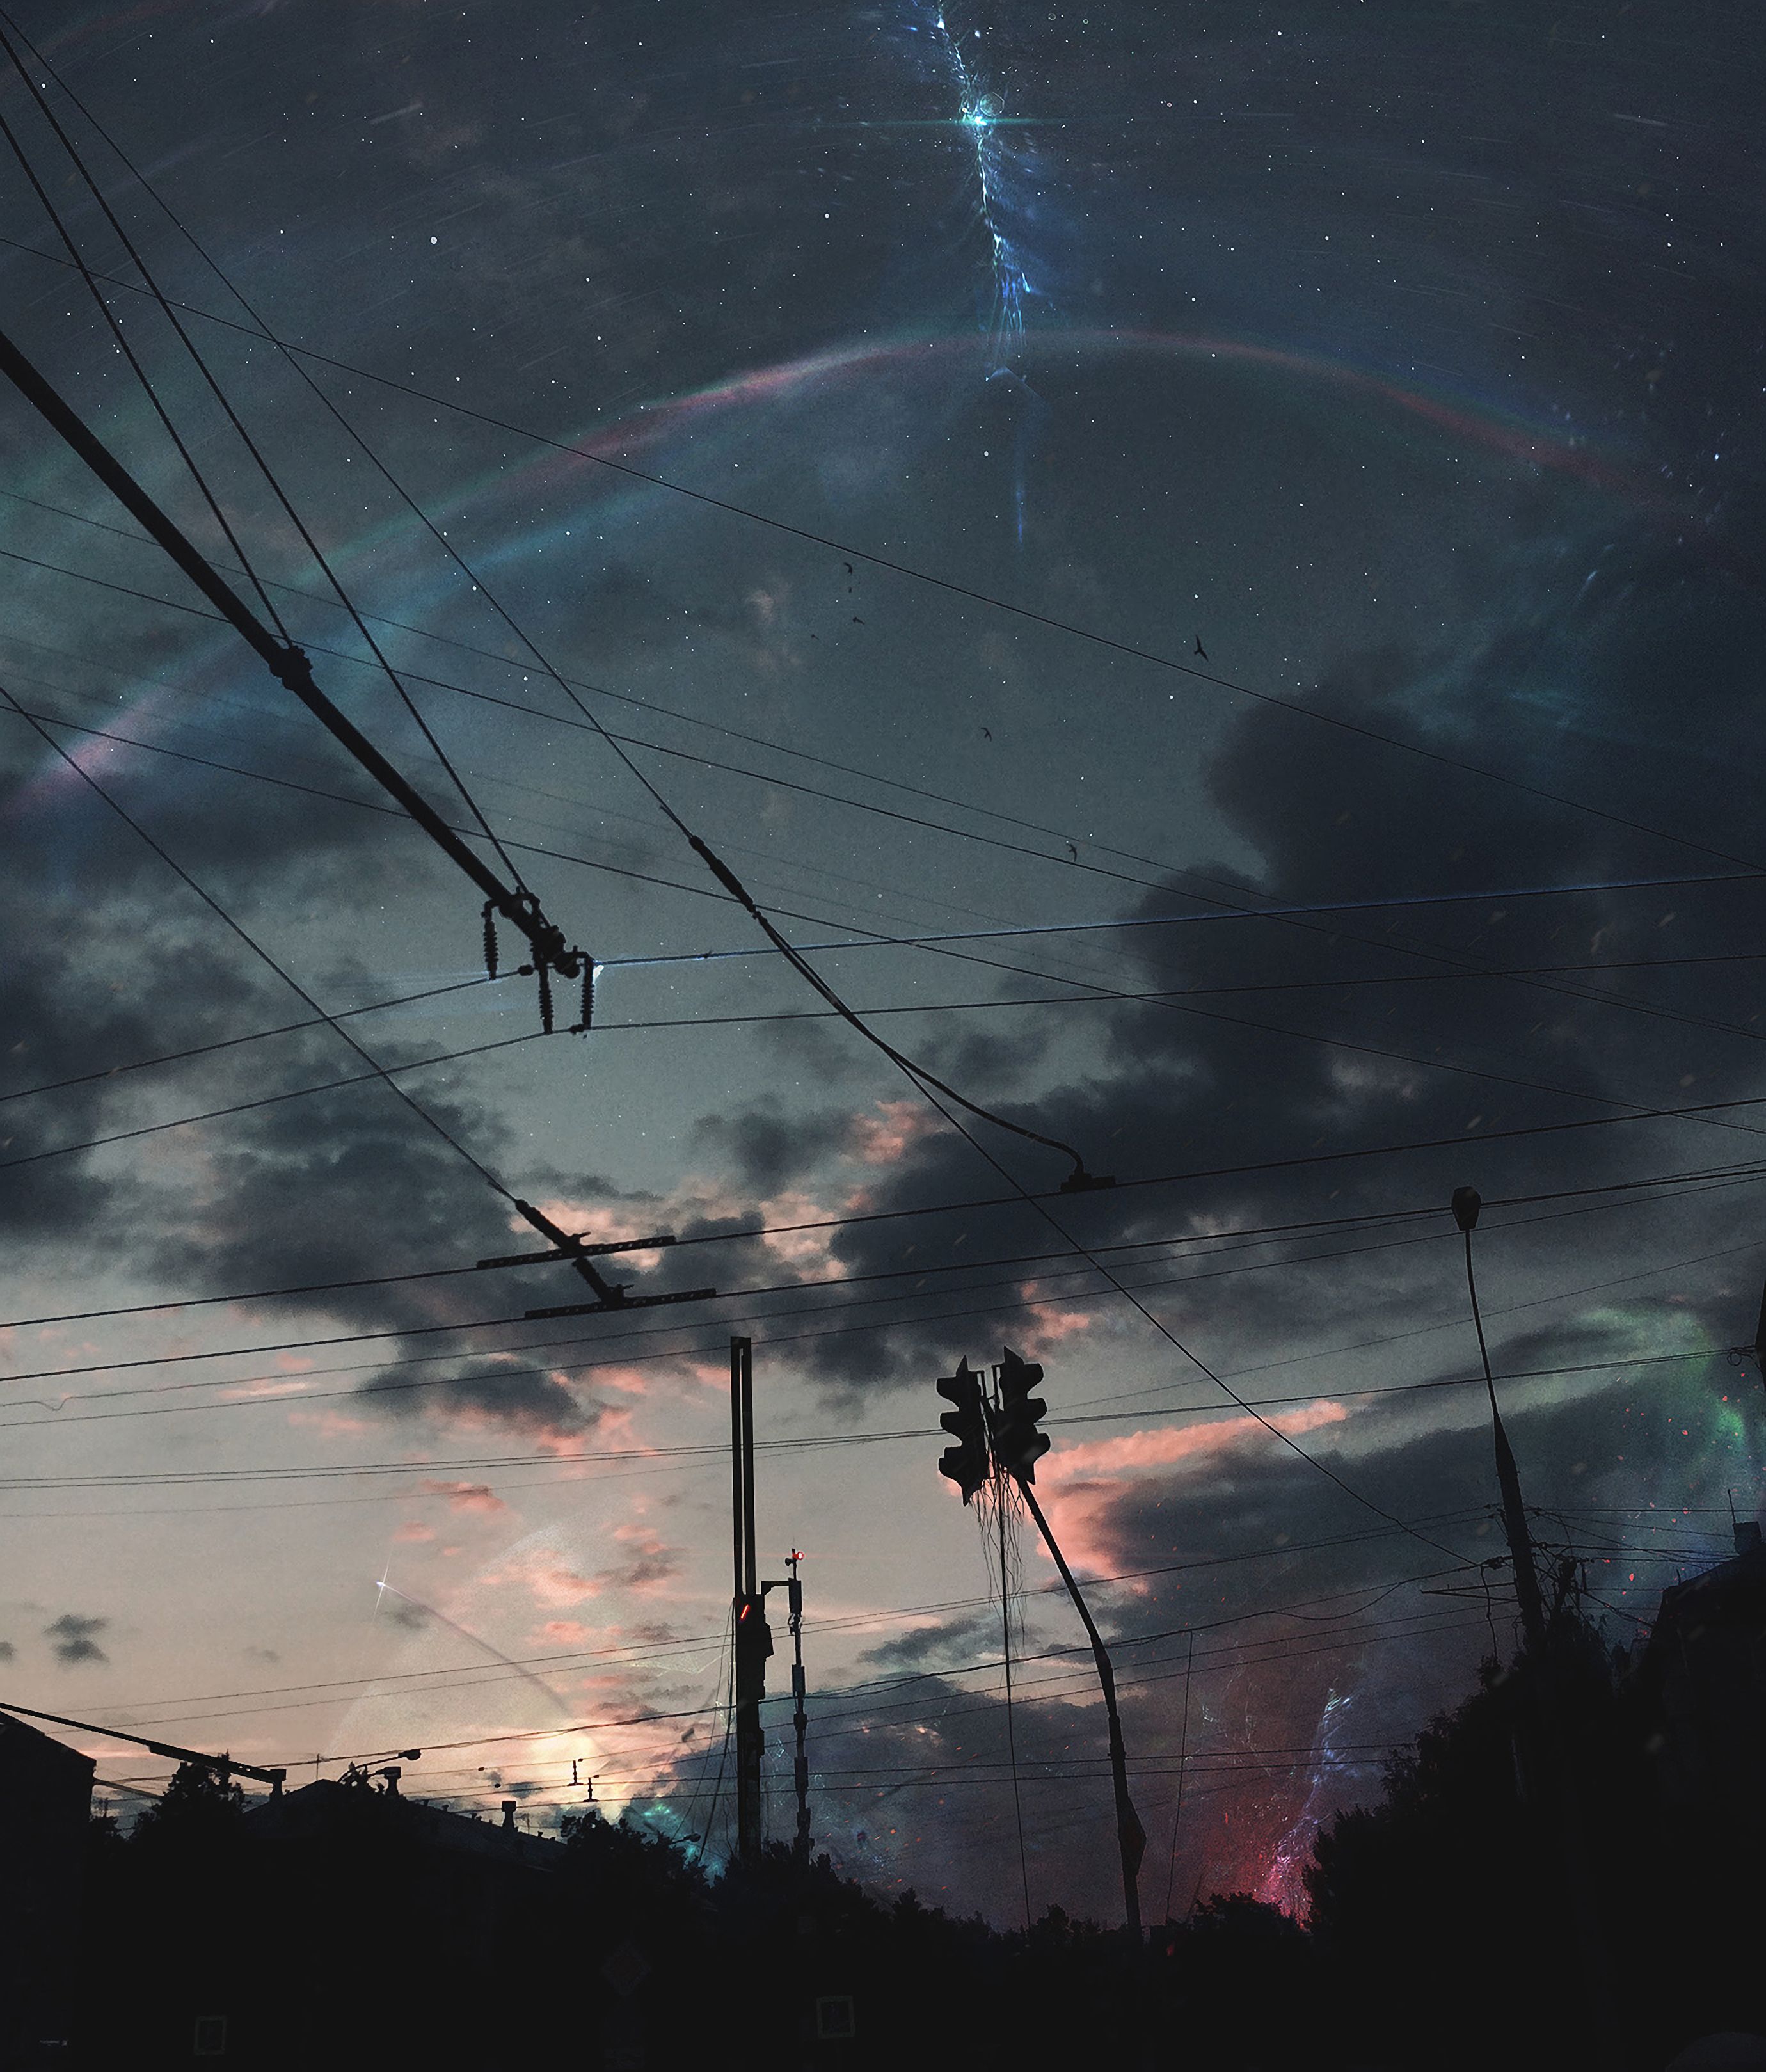 art, sky, wires, night, clouds, wire